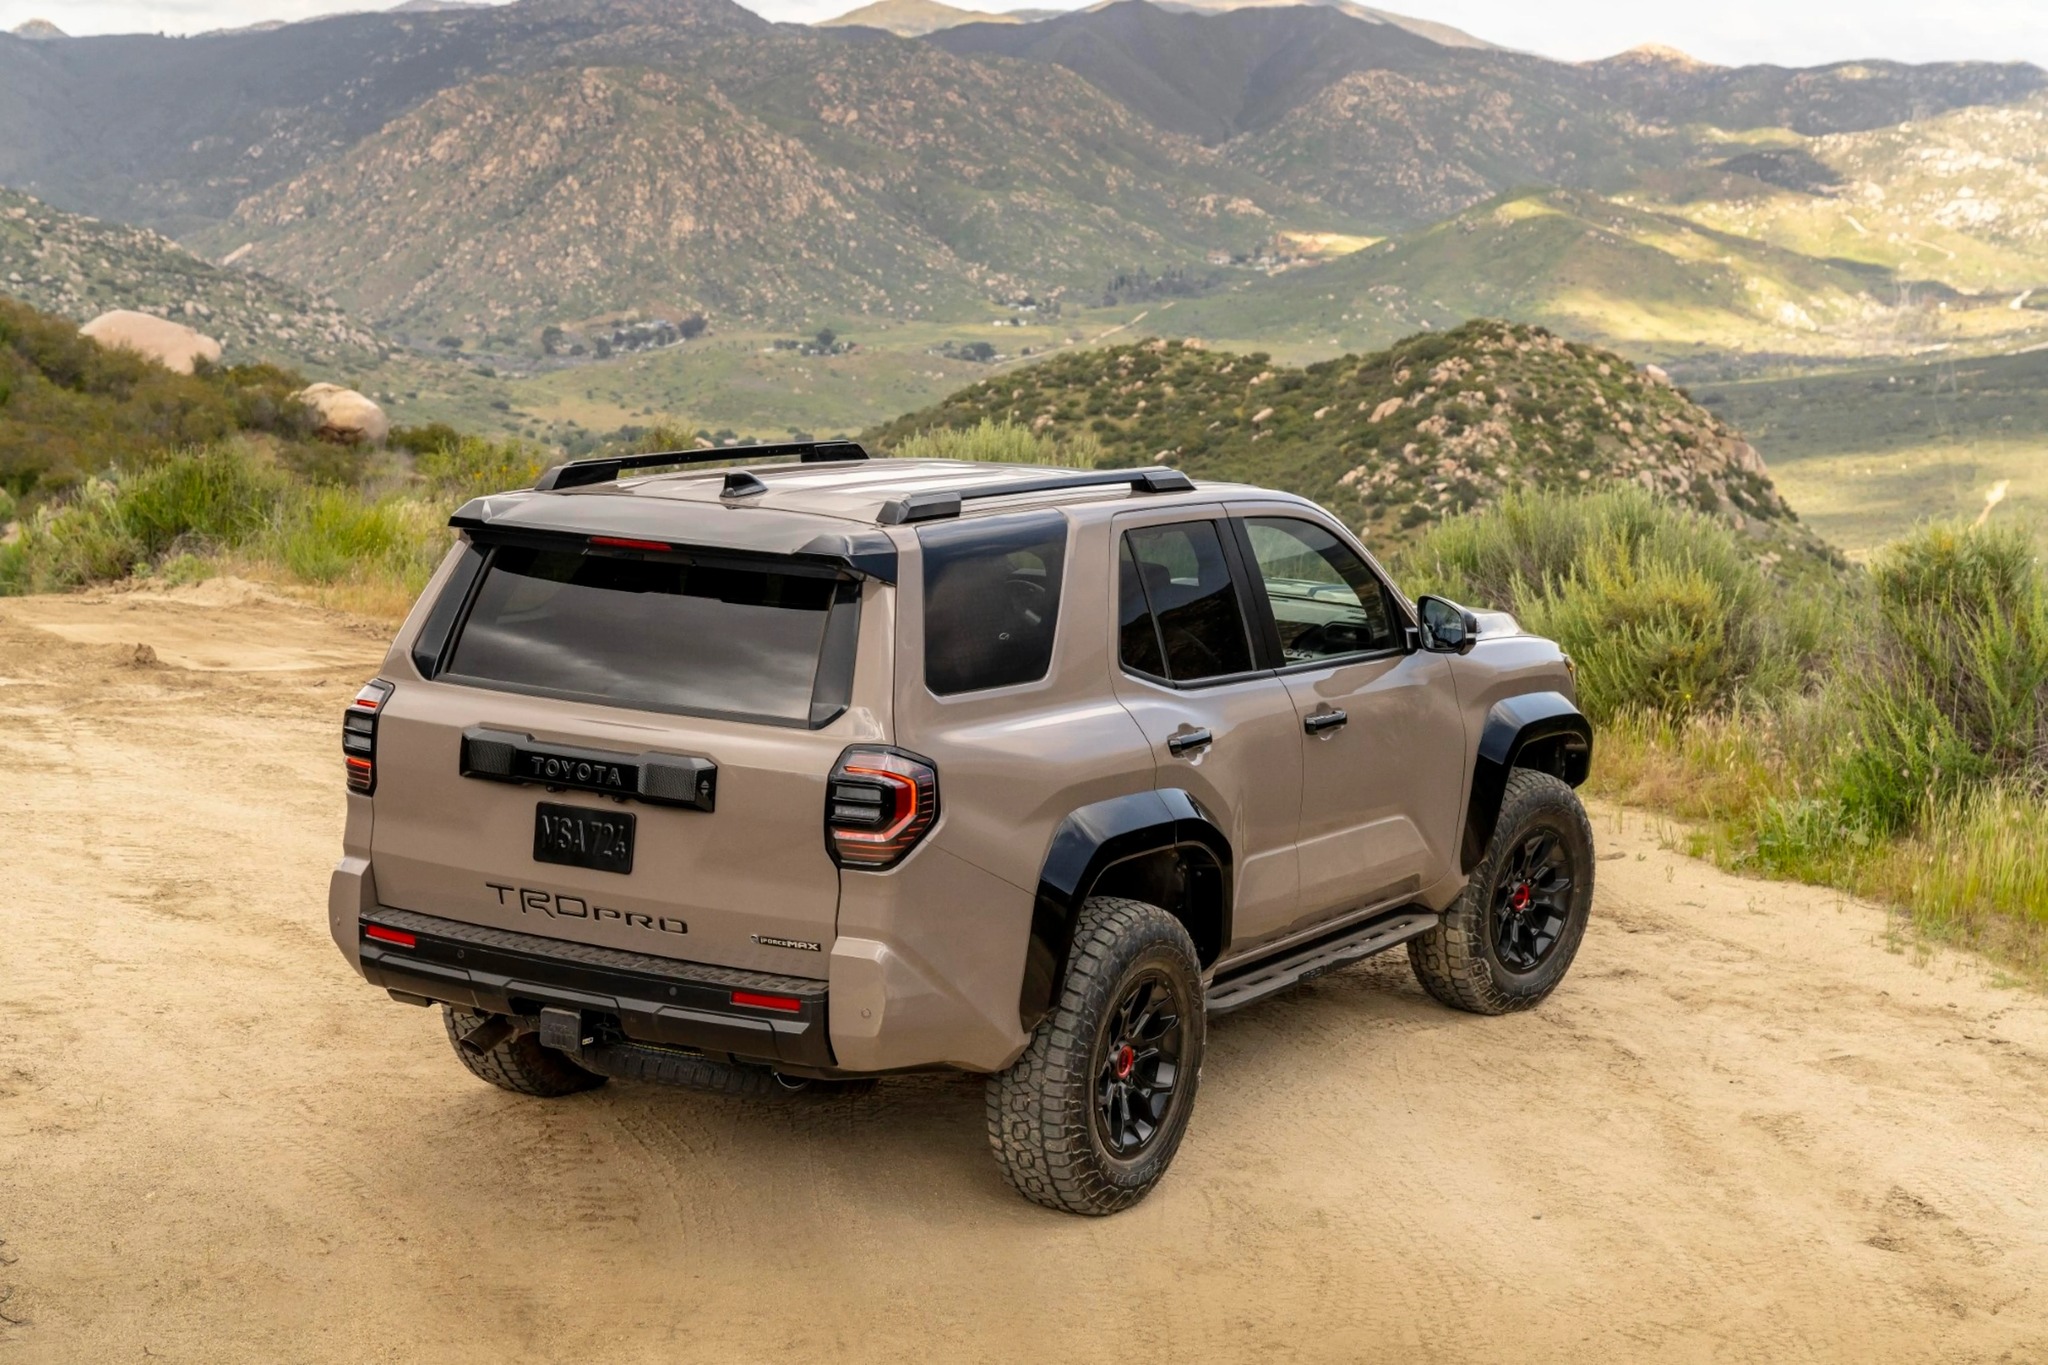 2025 Toyota 4runner 2025 4Runner Photos & Specs! 🔥 Trailhunter, TRD Pro, Off-Road, Limited Trims 2025 Toyota 4Runner Wallpapers 3